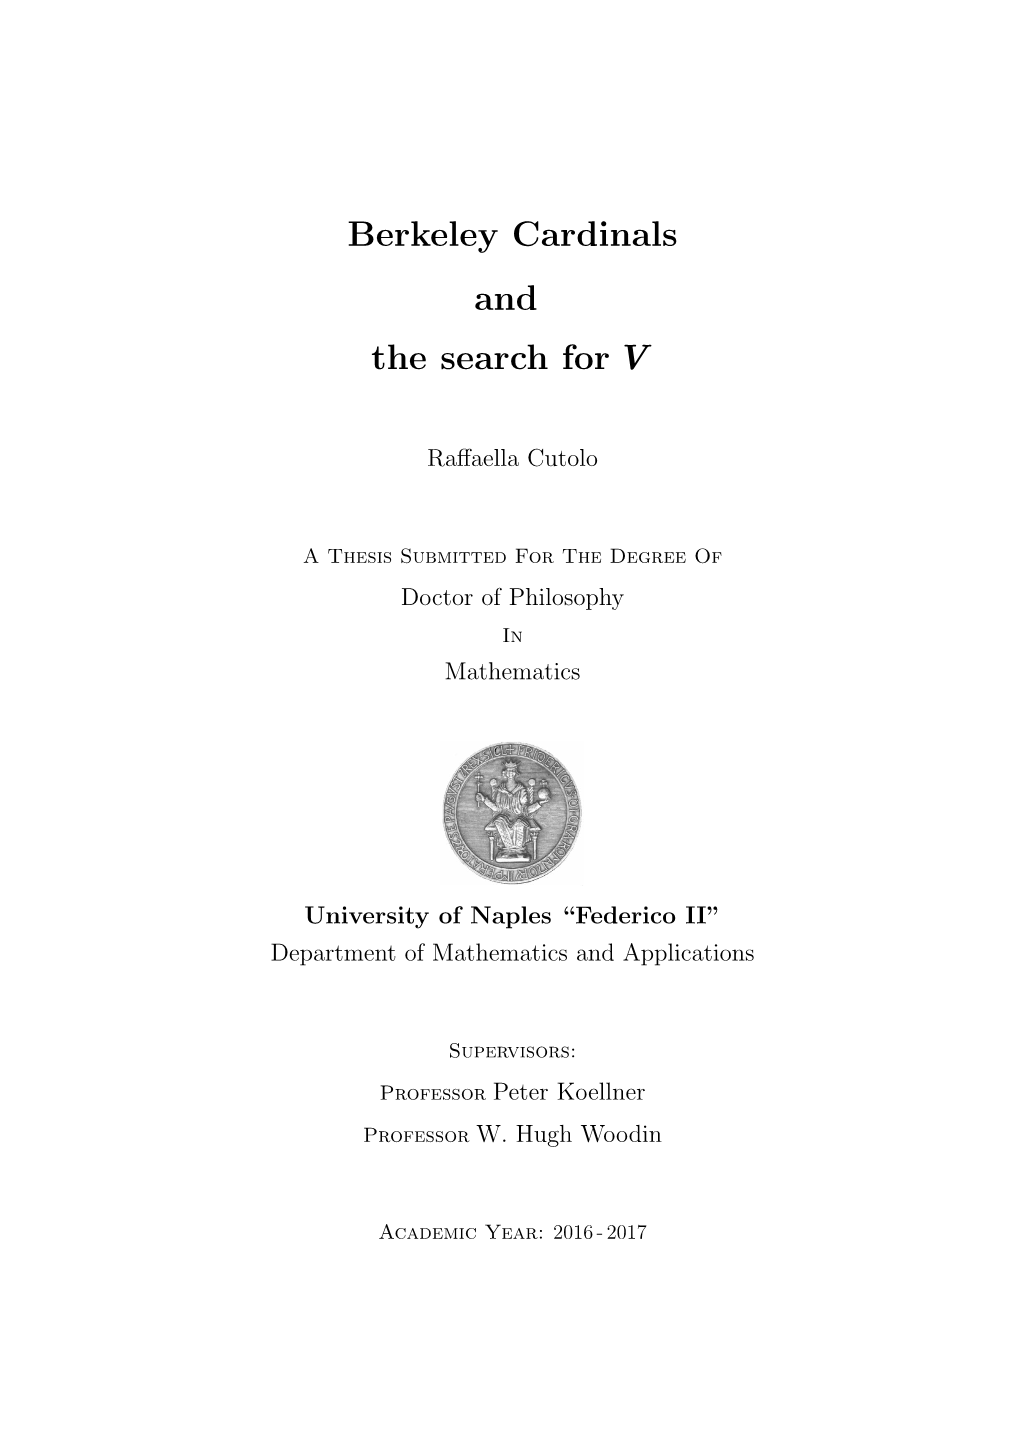 Berkeley Cardinals and the Search for V